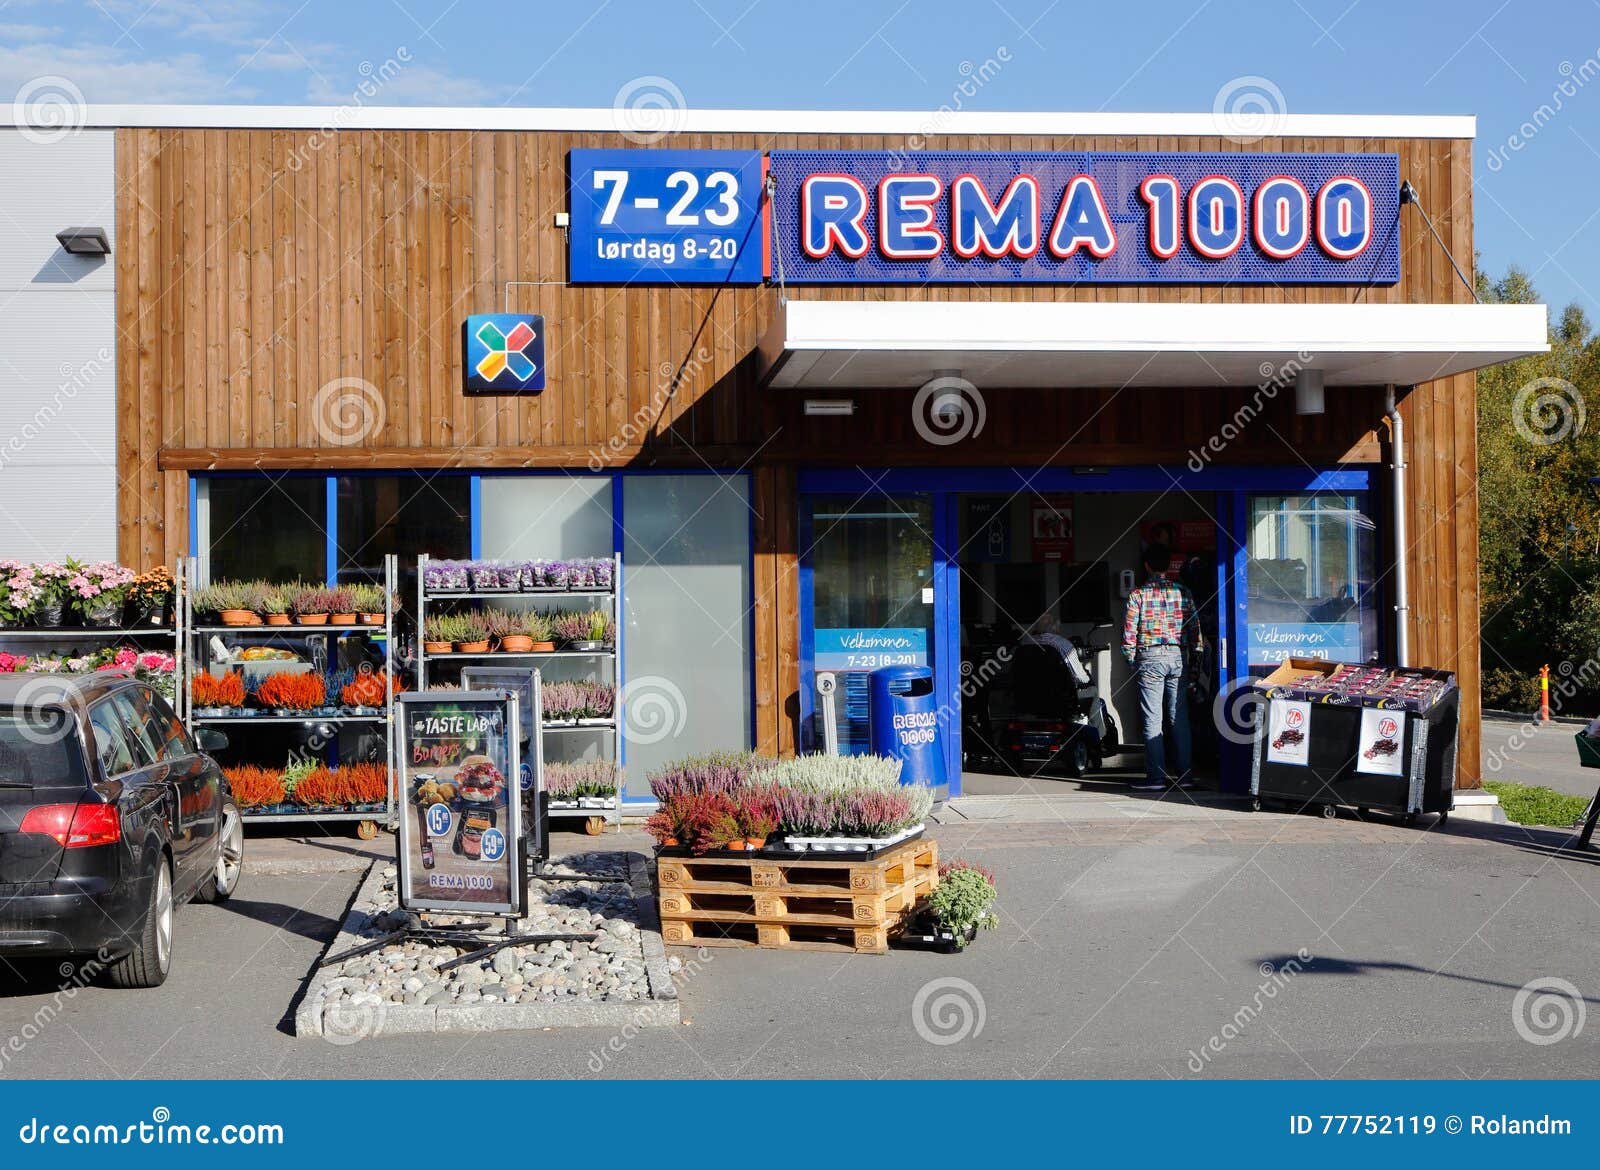 Kilde Indica Luske Rema 1000 editorial stock image. Image of norway, grocery - 77752119